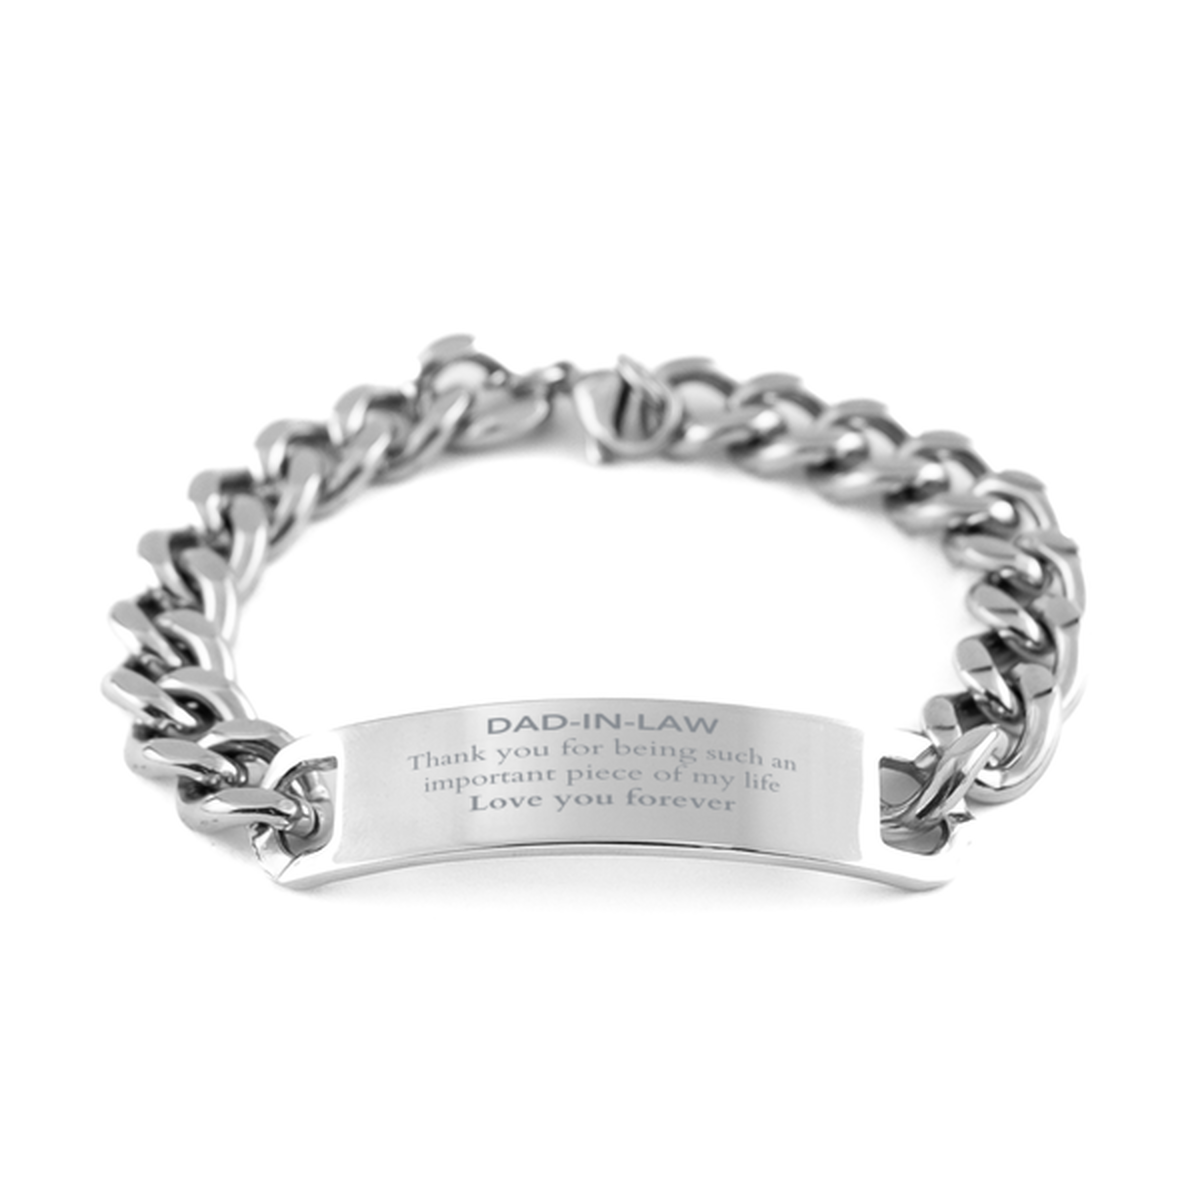 Appropriate Dad-in-law Cuban Chain Stainless Steel Bracelet Epic Birthday Gifts for Dad-in-law Thank you for being such an important piece of my life Dad-in-law Christmas Mothers Fathers Day